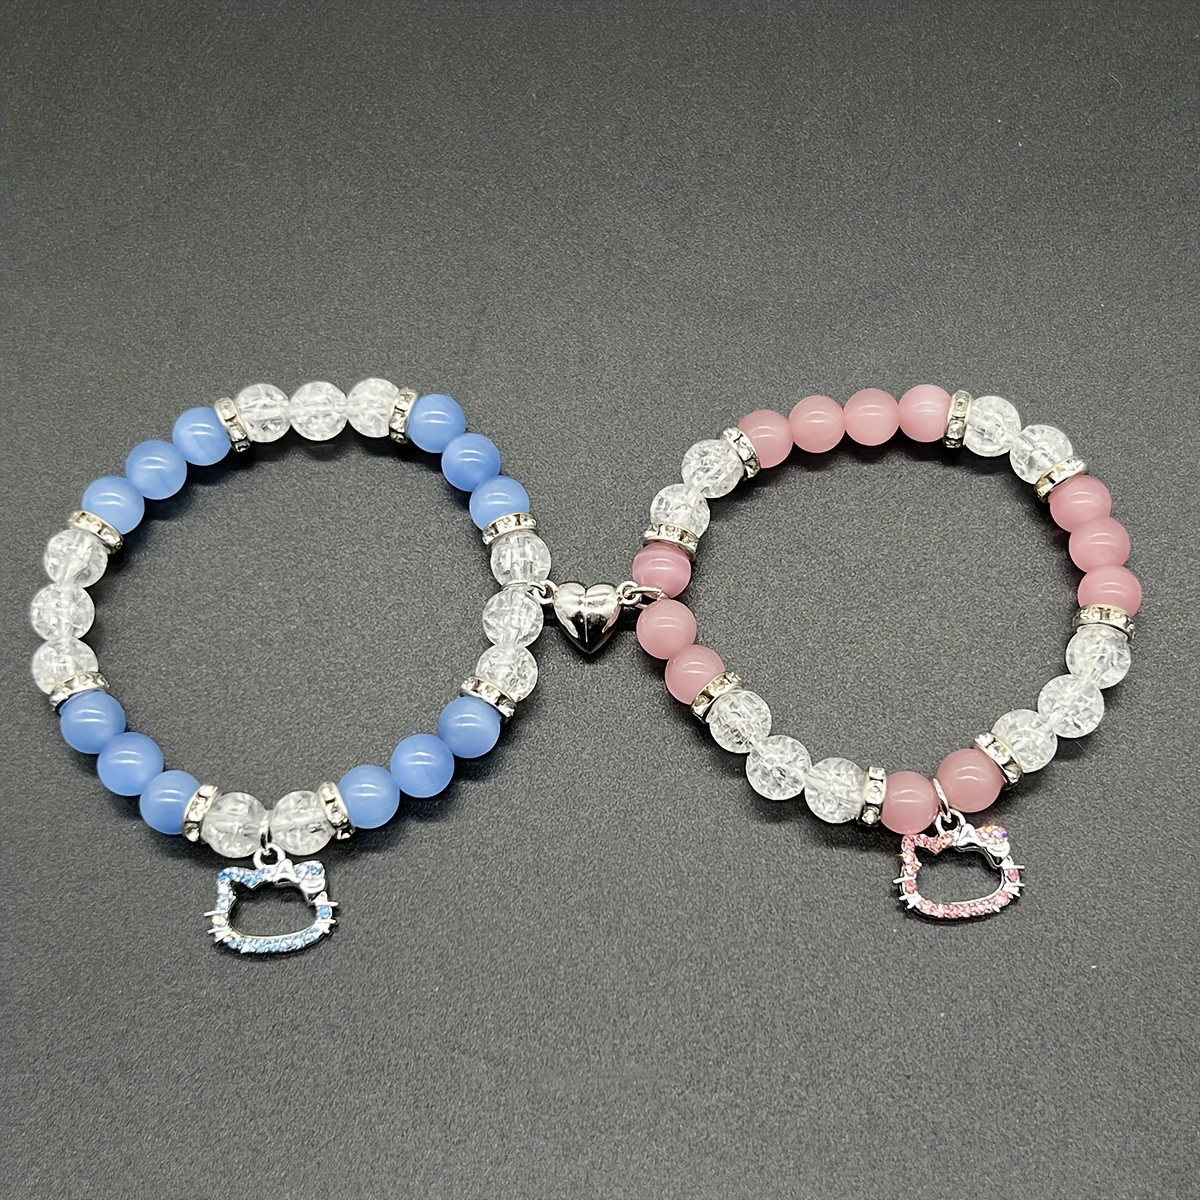 

Officially Authorized Hello Kitty Beaded Bracelets, Unisex, Minimalist Style, Vacation Theme, Cute Anime Magnetic Love Heart Charm Hand Jewelry Accessory